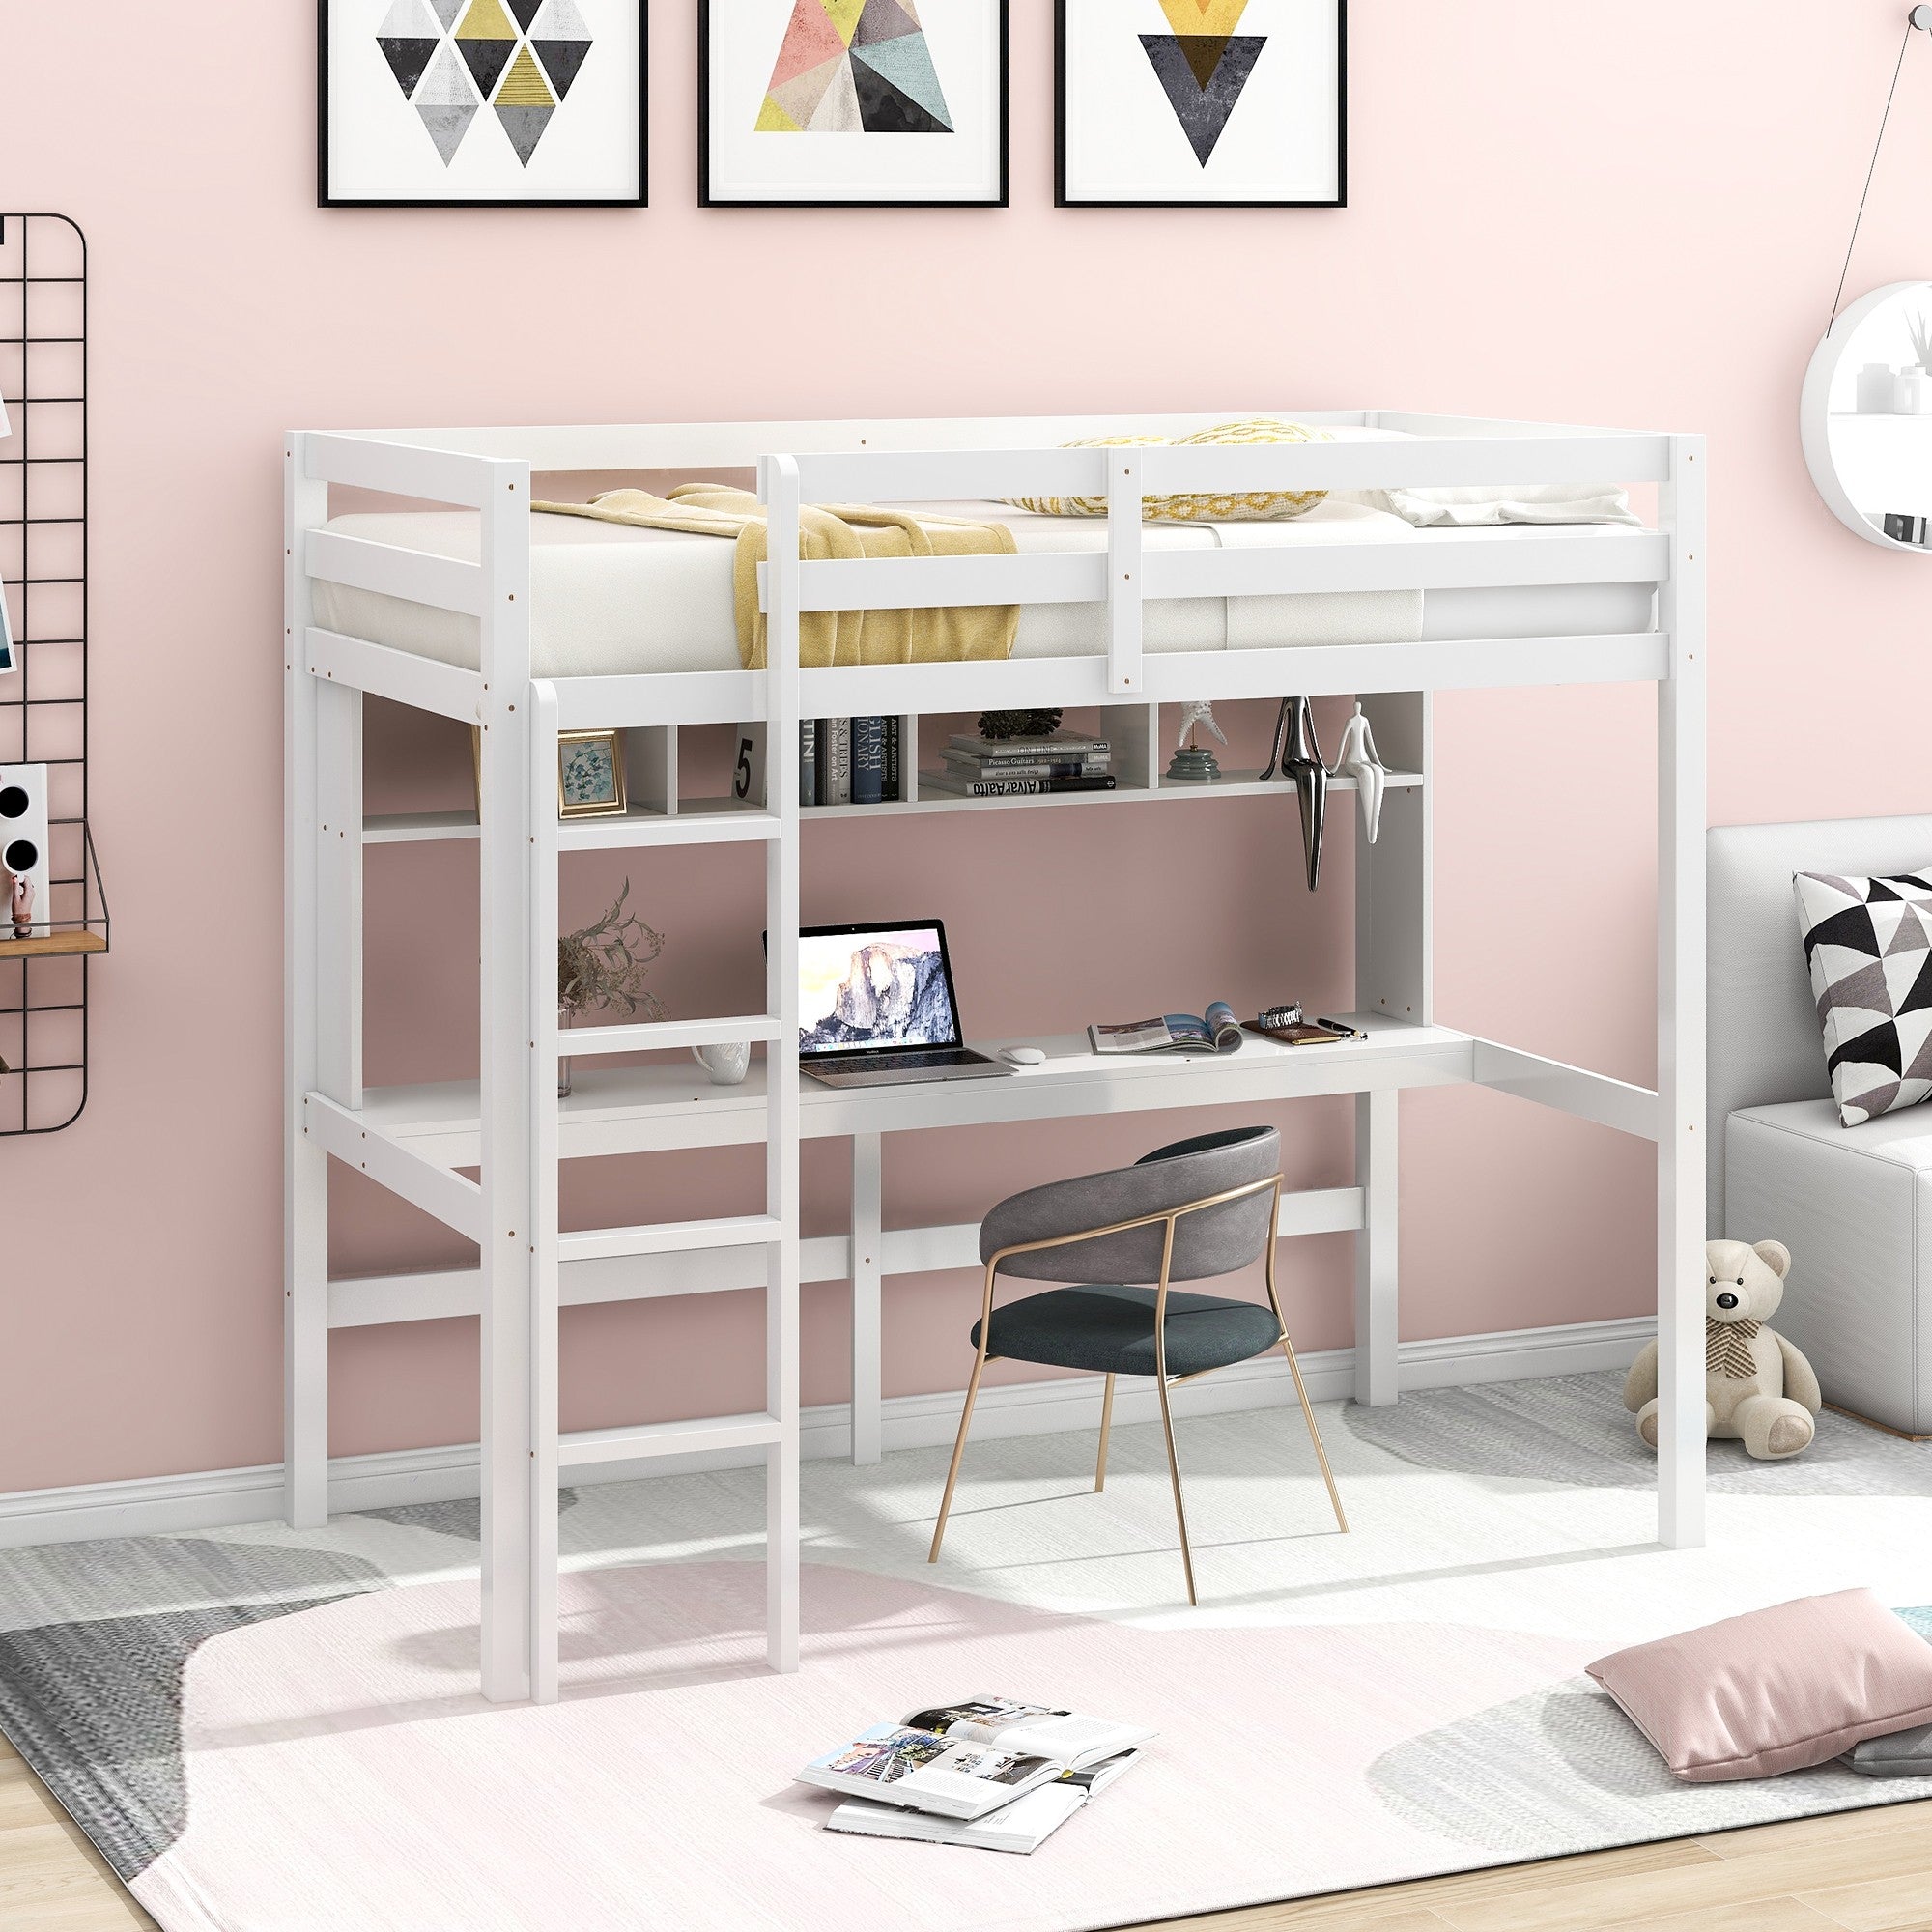 Minimalist-White-Twin-Size-Loft-Bed-with-Built-In-Desk-and-Shelf-Beds-&-Bed-Frames